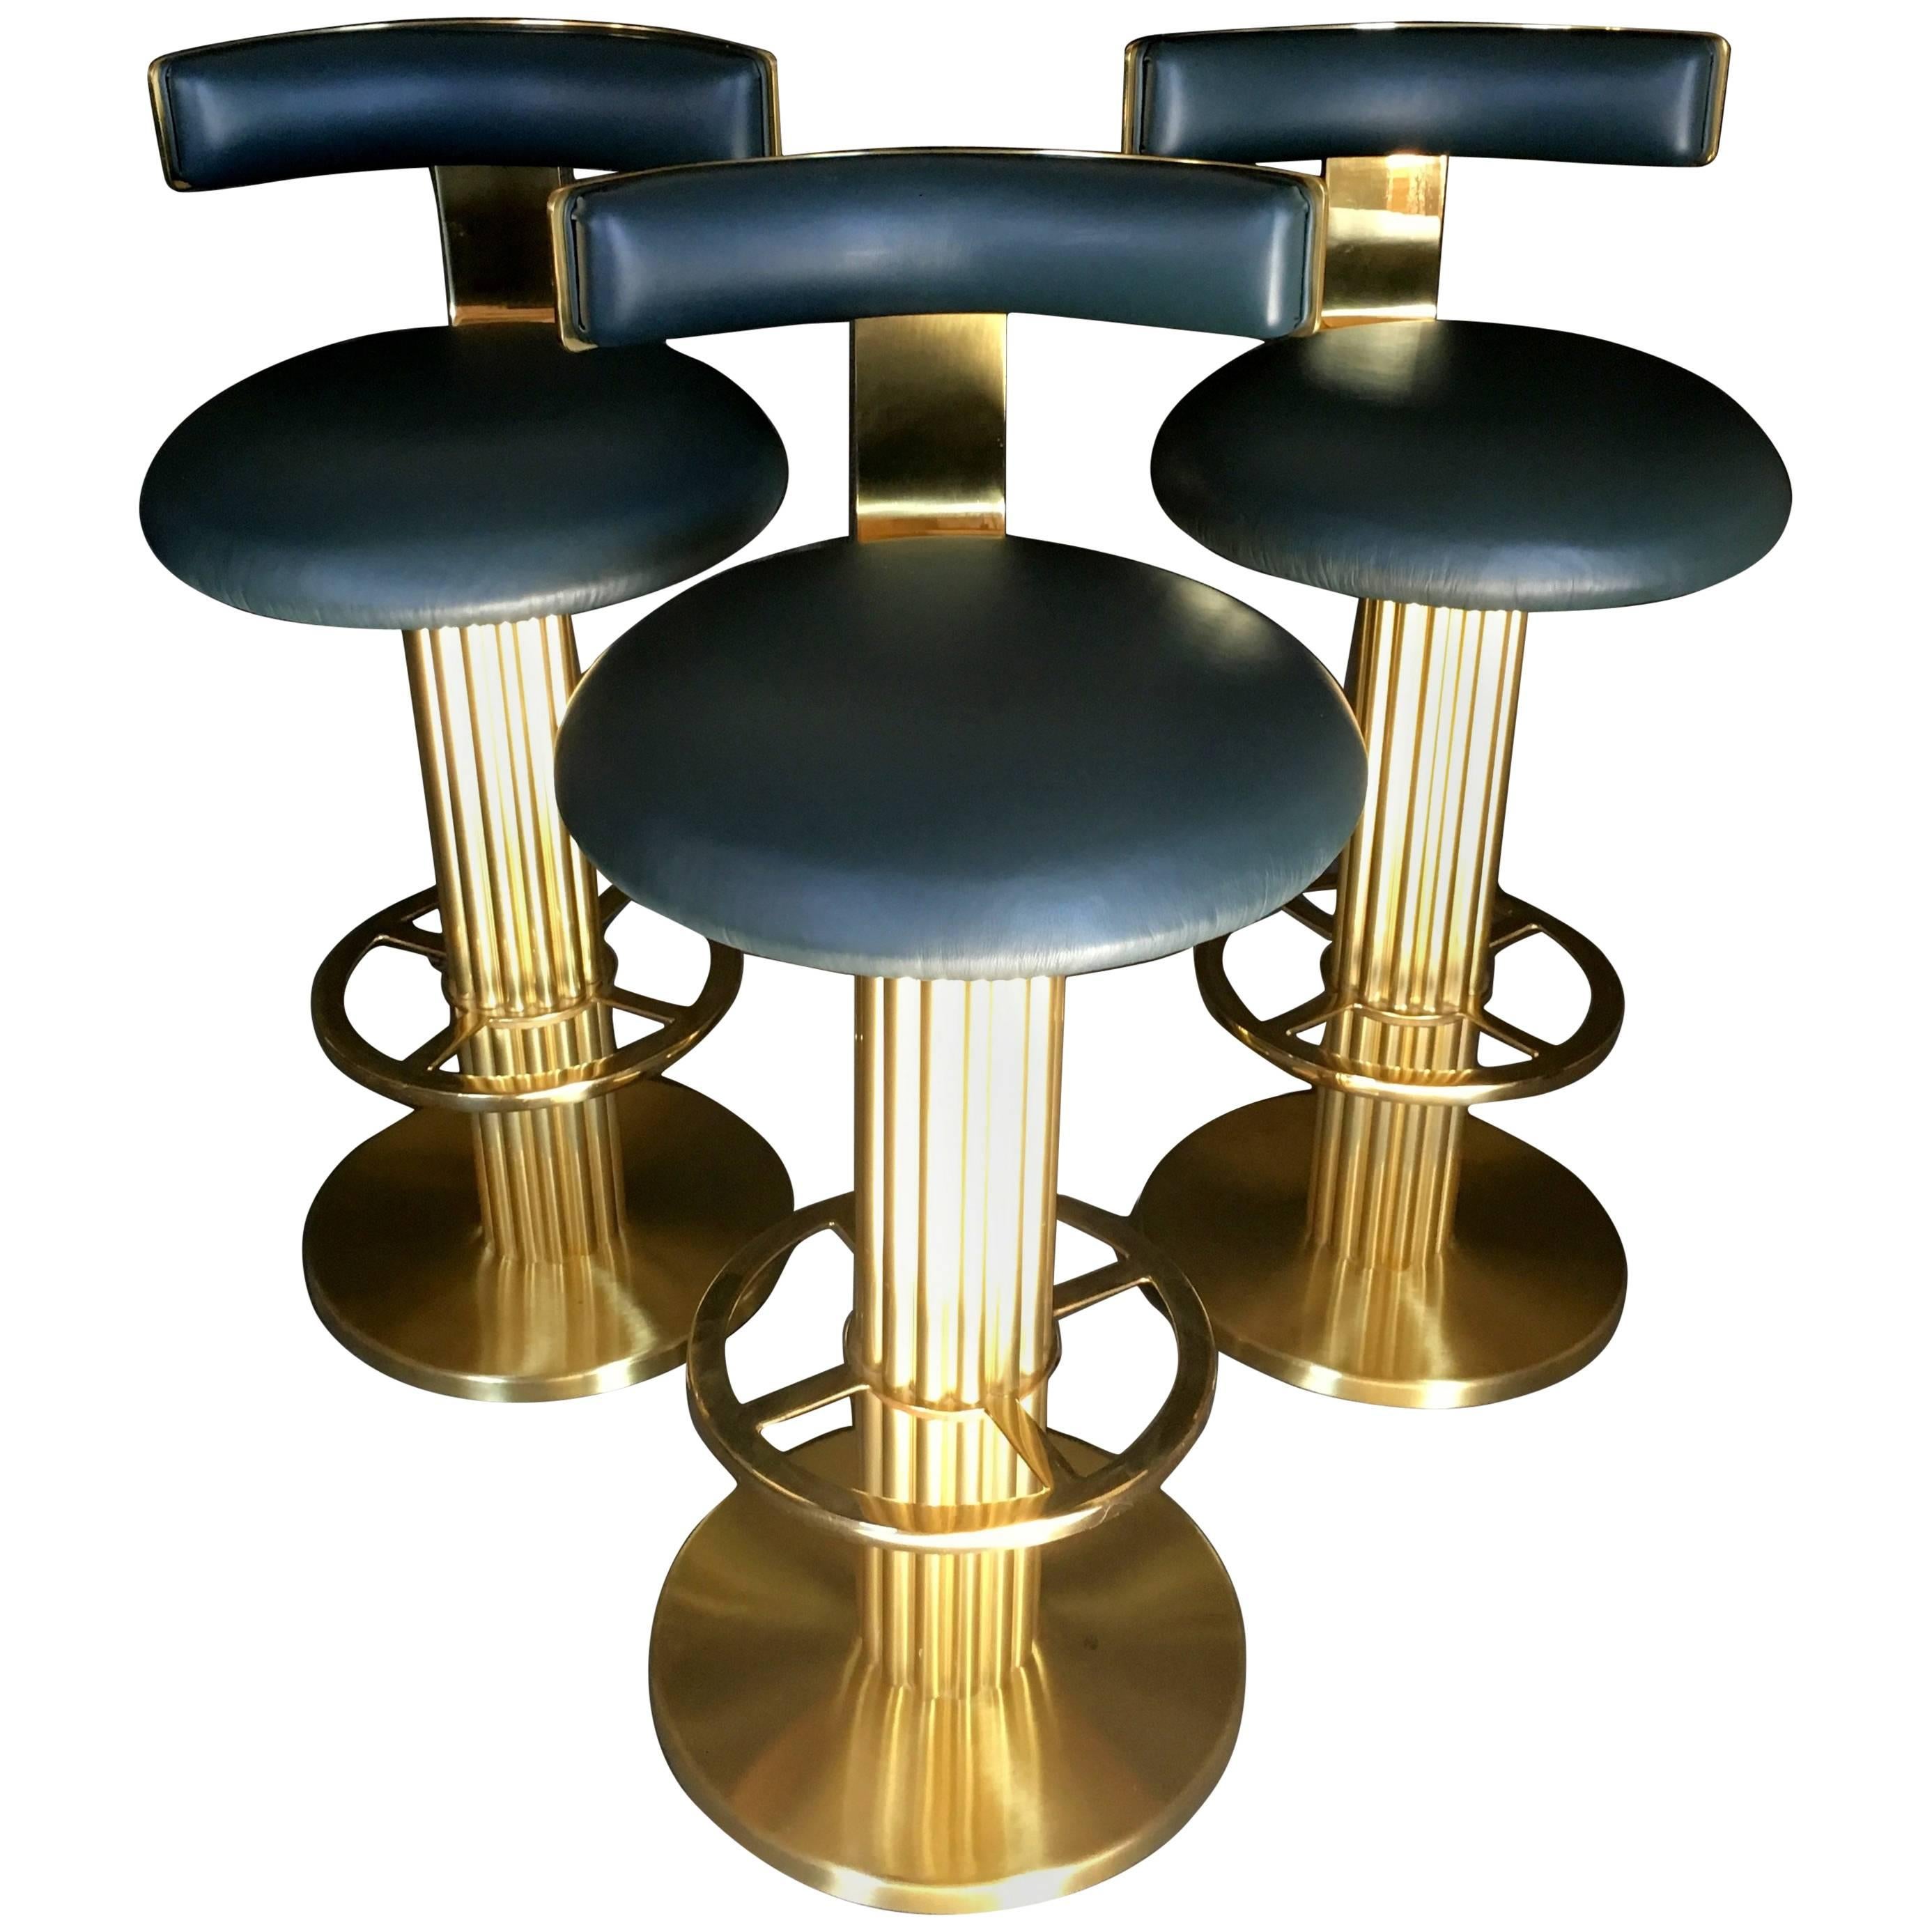 Exquisite Set of three Brass Bar Stools by Design for Leisure